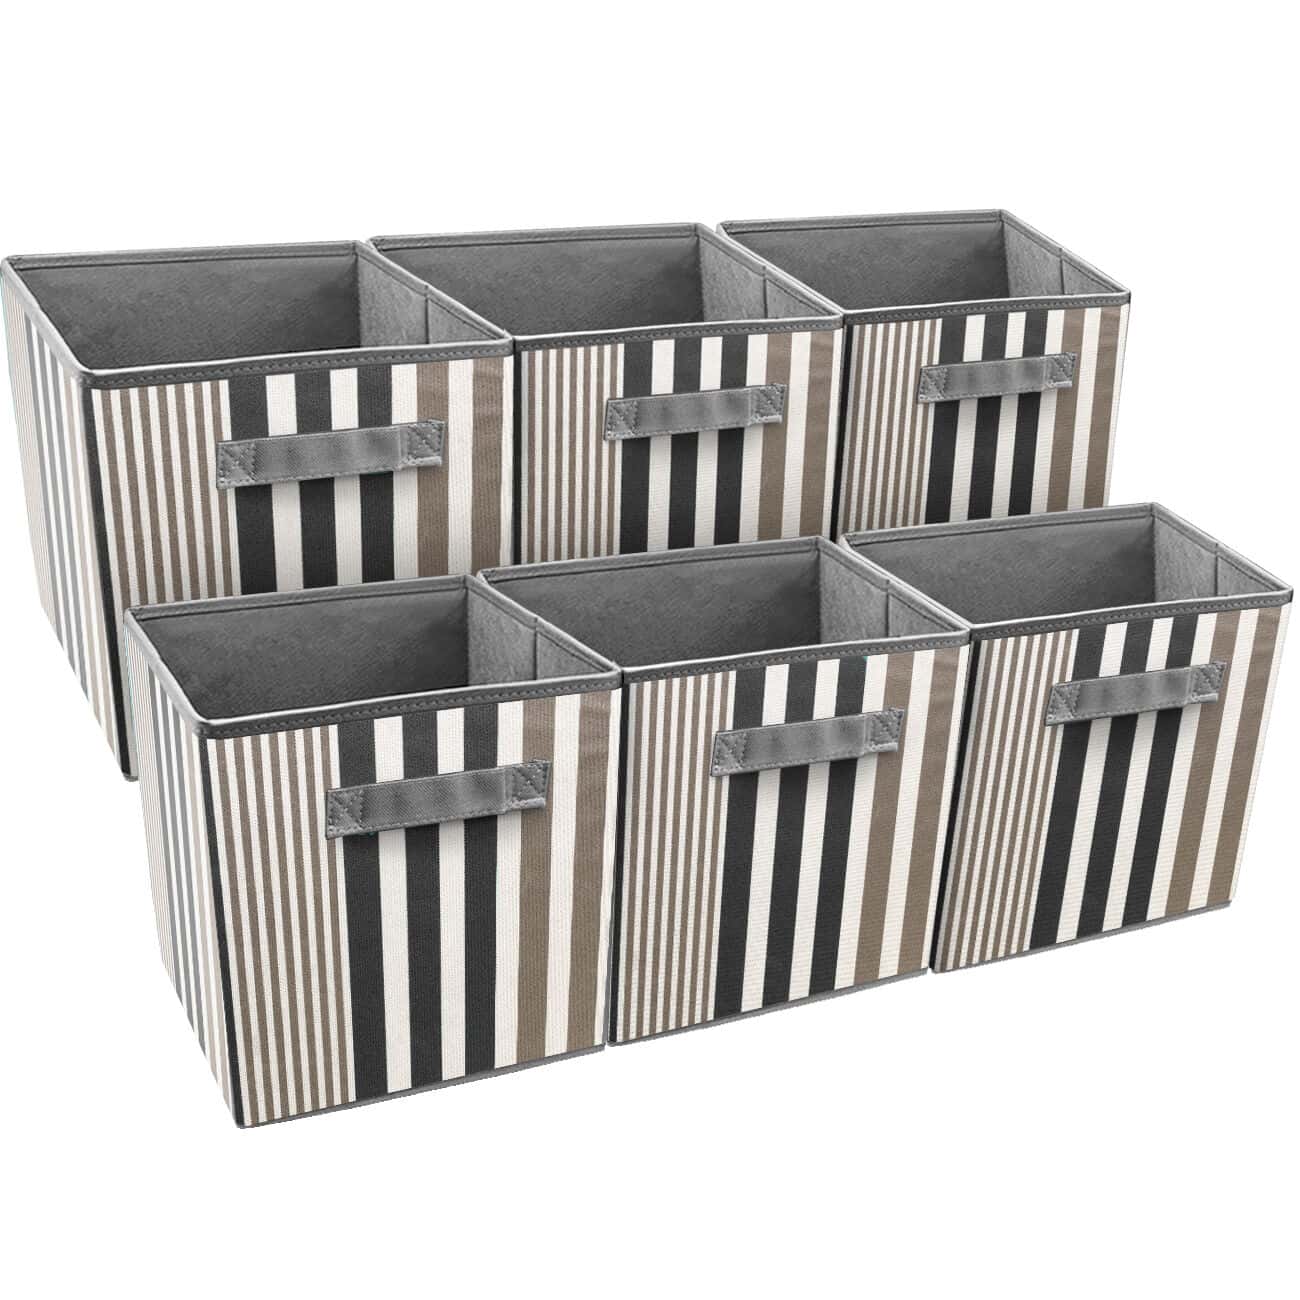 Four black and white striped storage bins with handles.